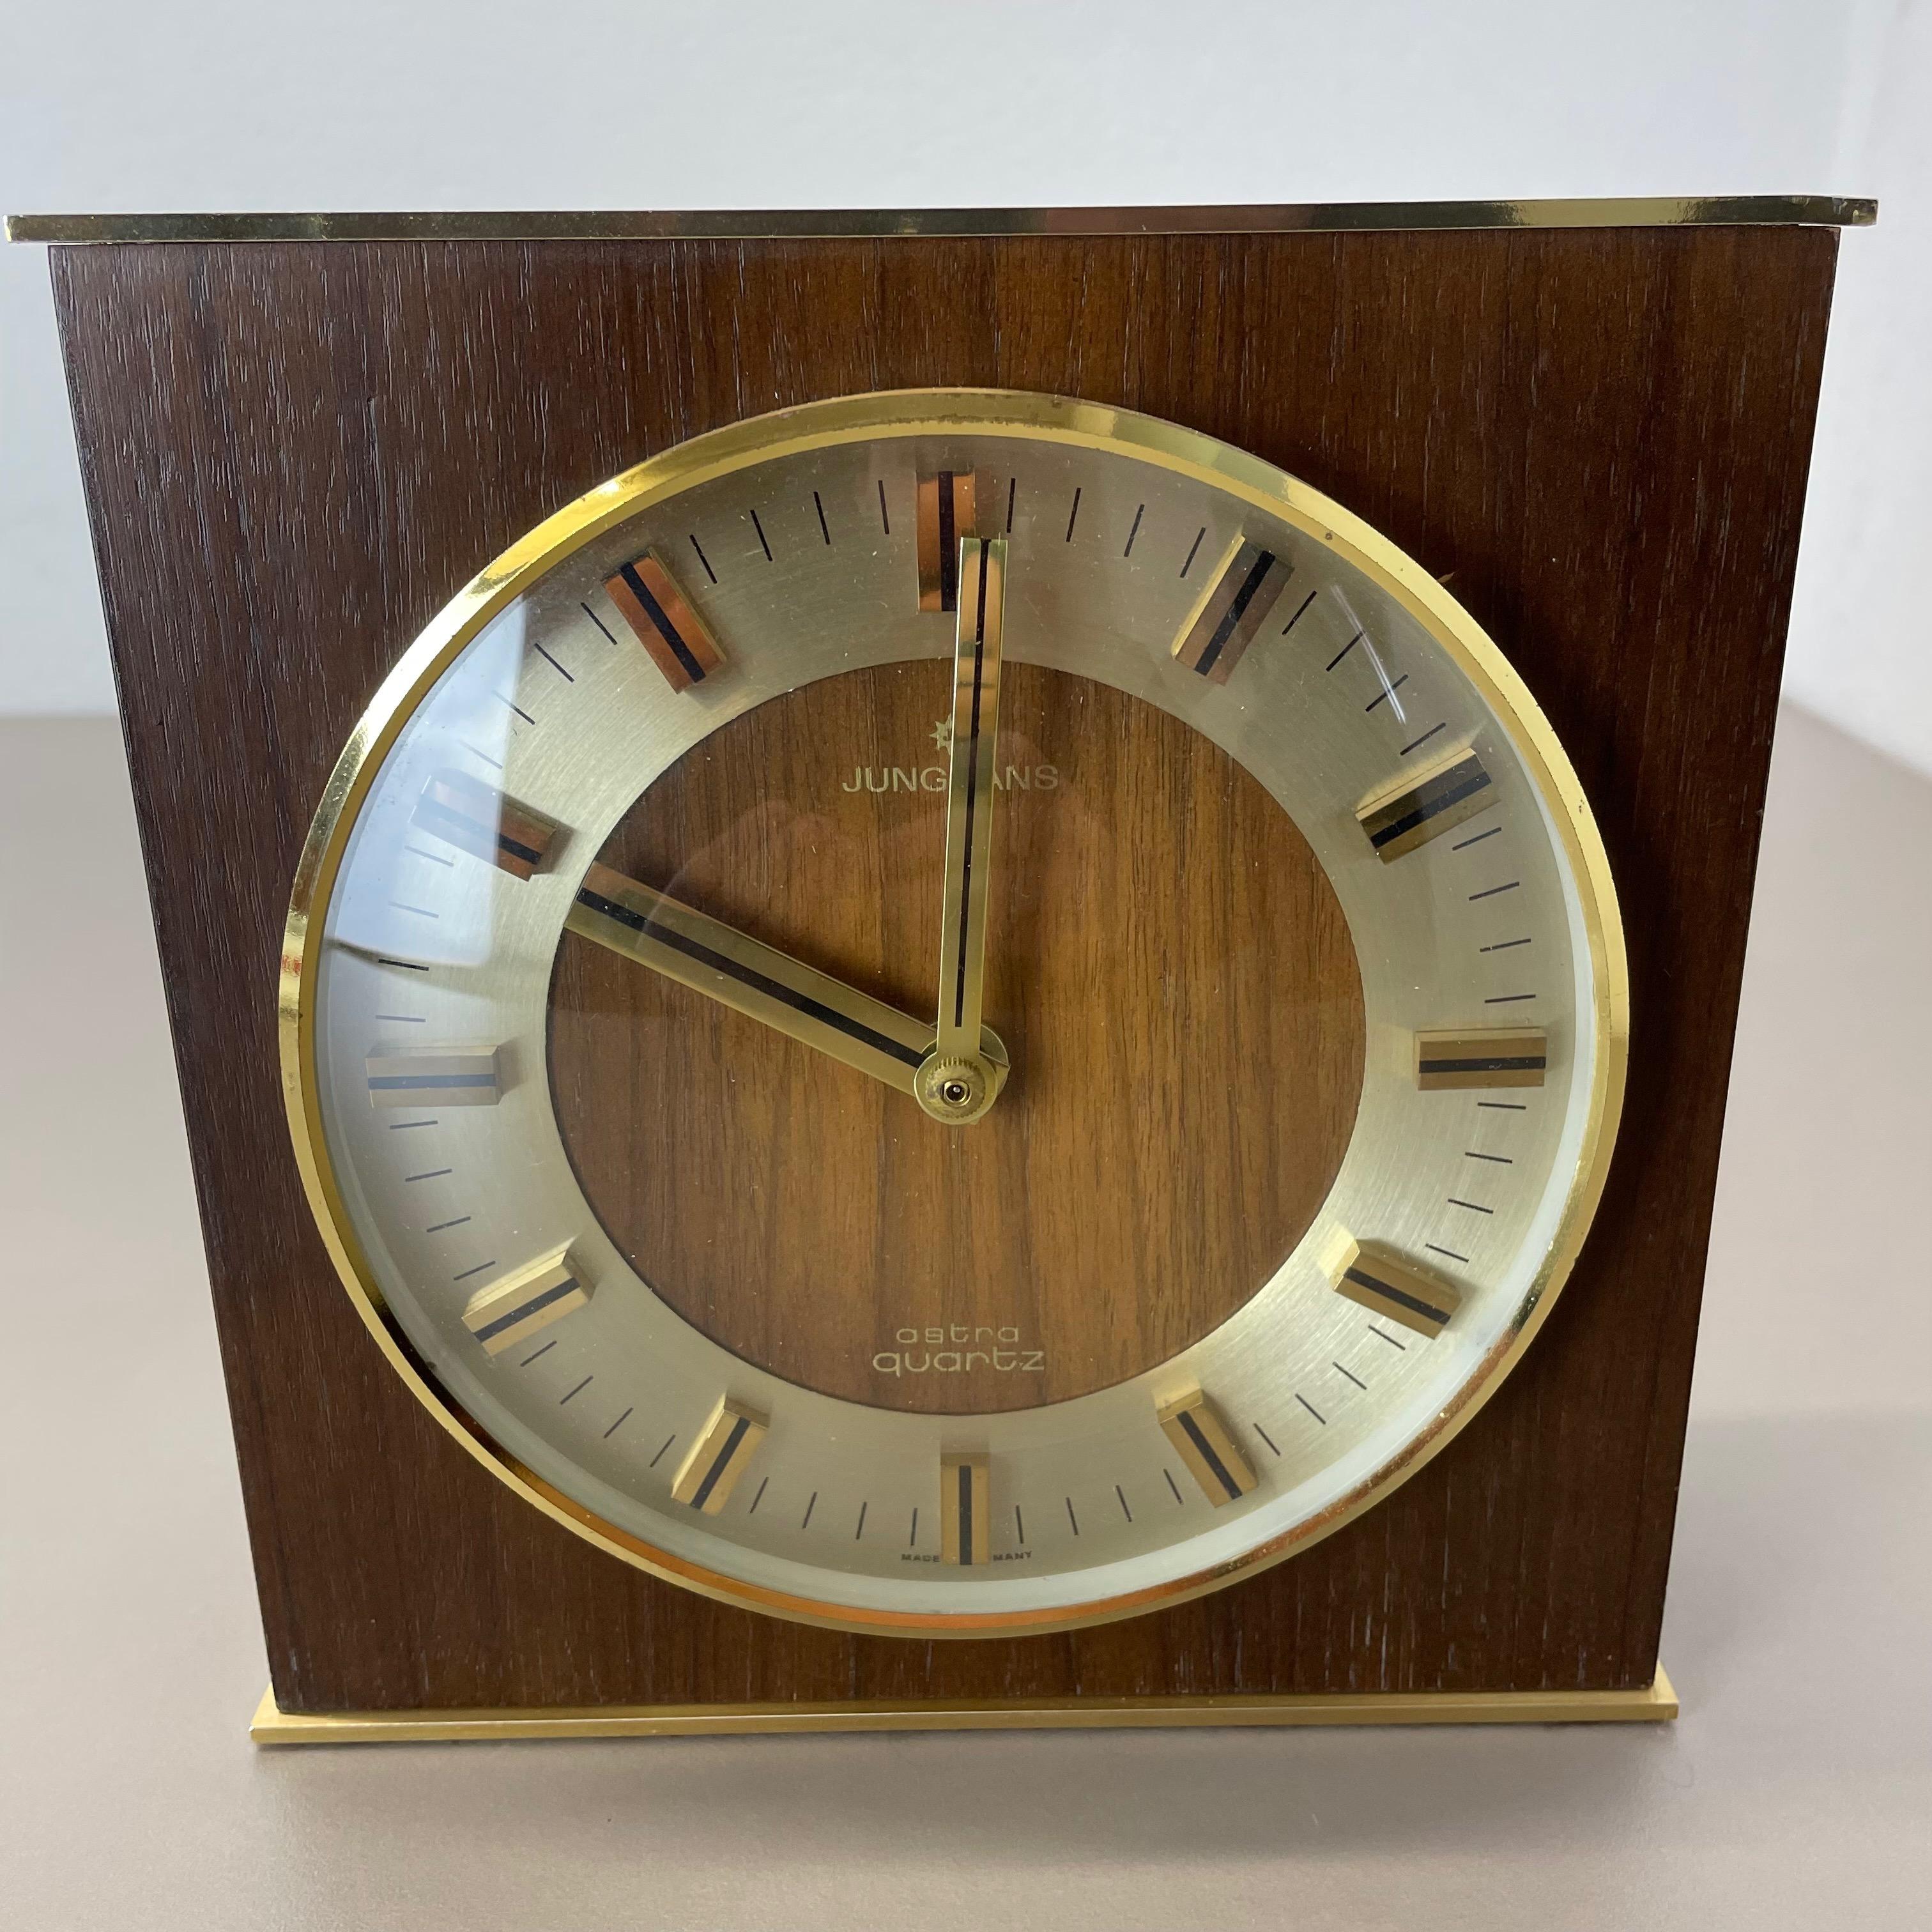 Hollywood Regency Brass Wooden Table Clock Junghans Astra Quartz, Germany 1970s In Good Condition For Sale In Kirchlengern, DE